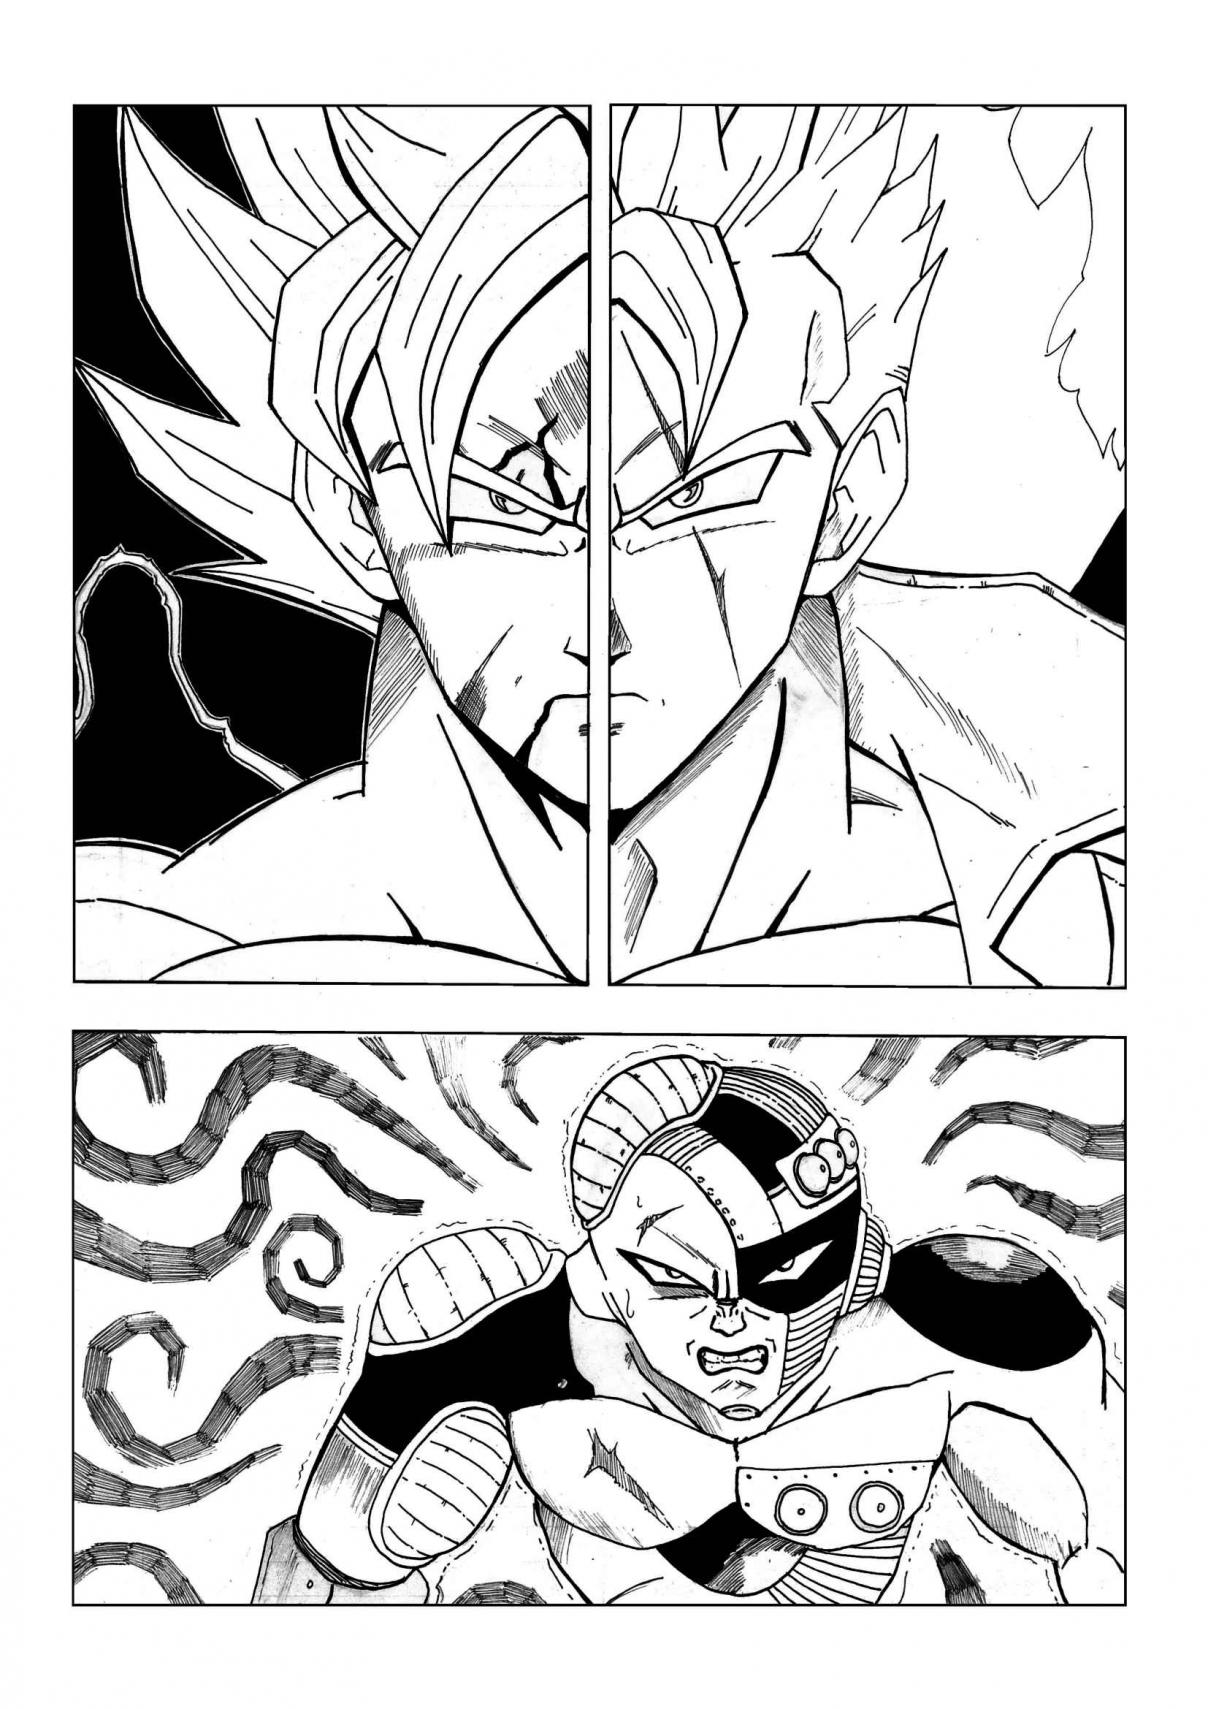 Dragon Ball Z Hope Is Back To The Future Vol. 1 Ch. 1